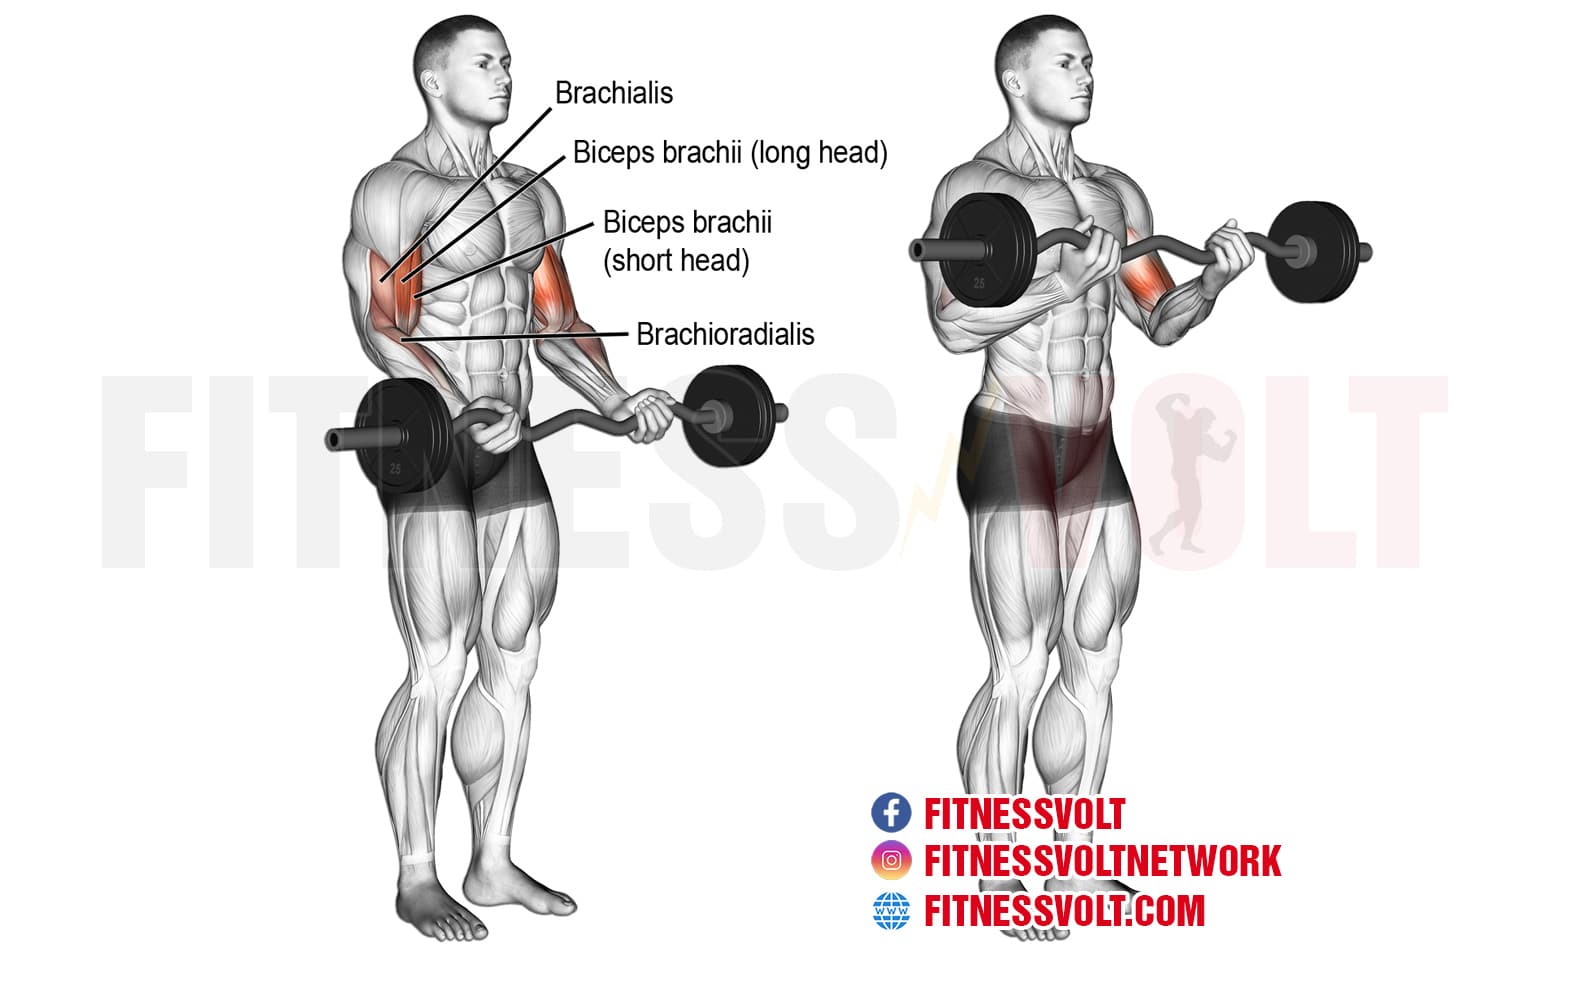 What Muscles Do Barbell Curls Work?